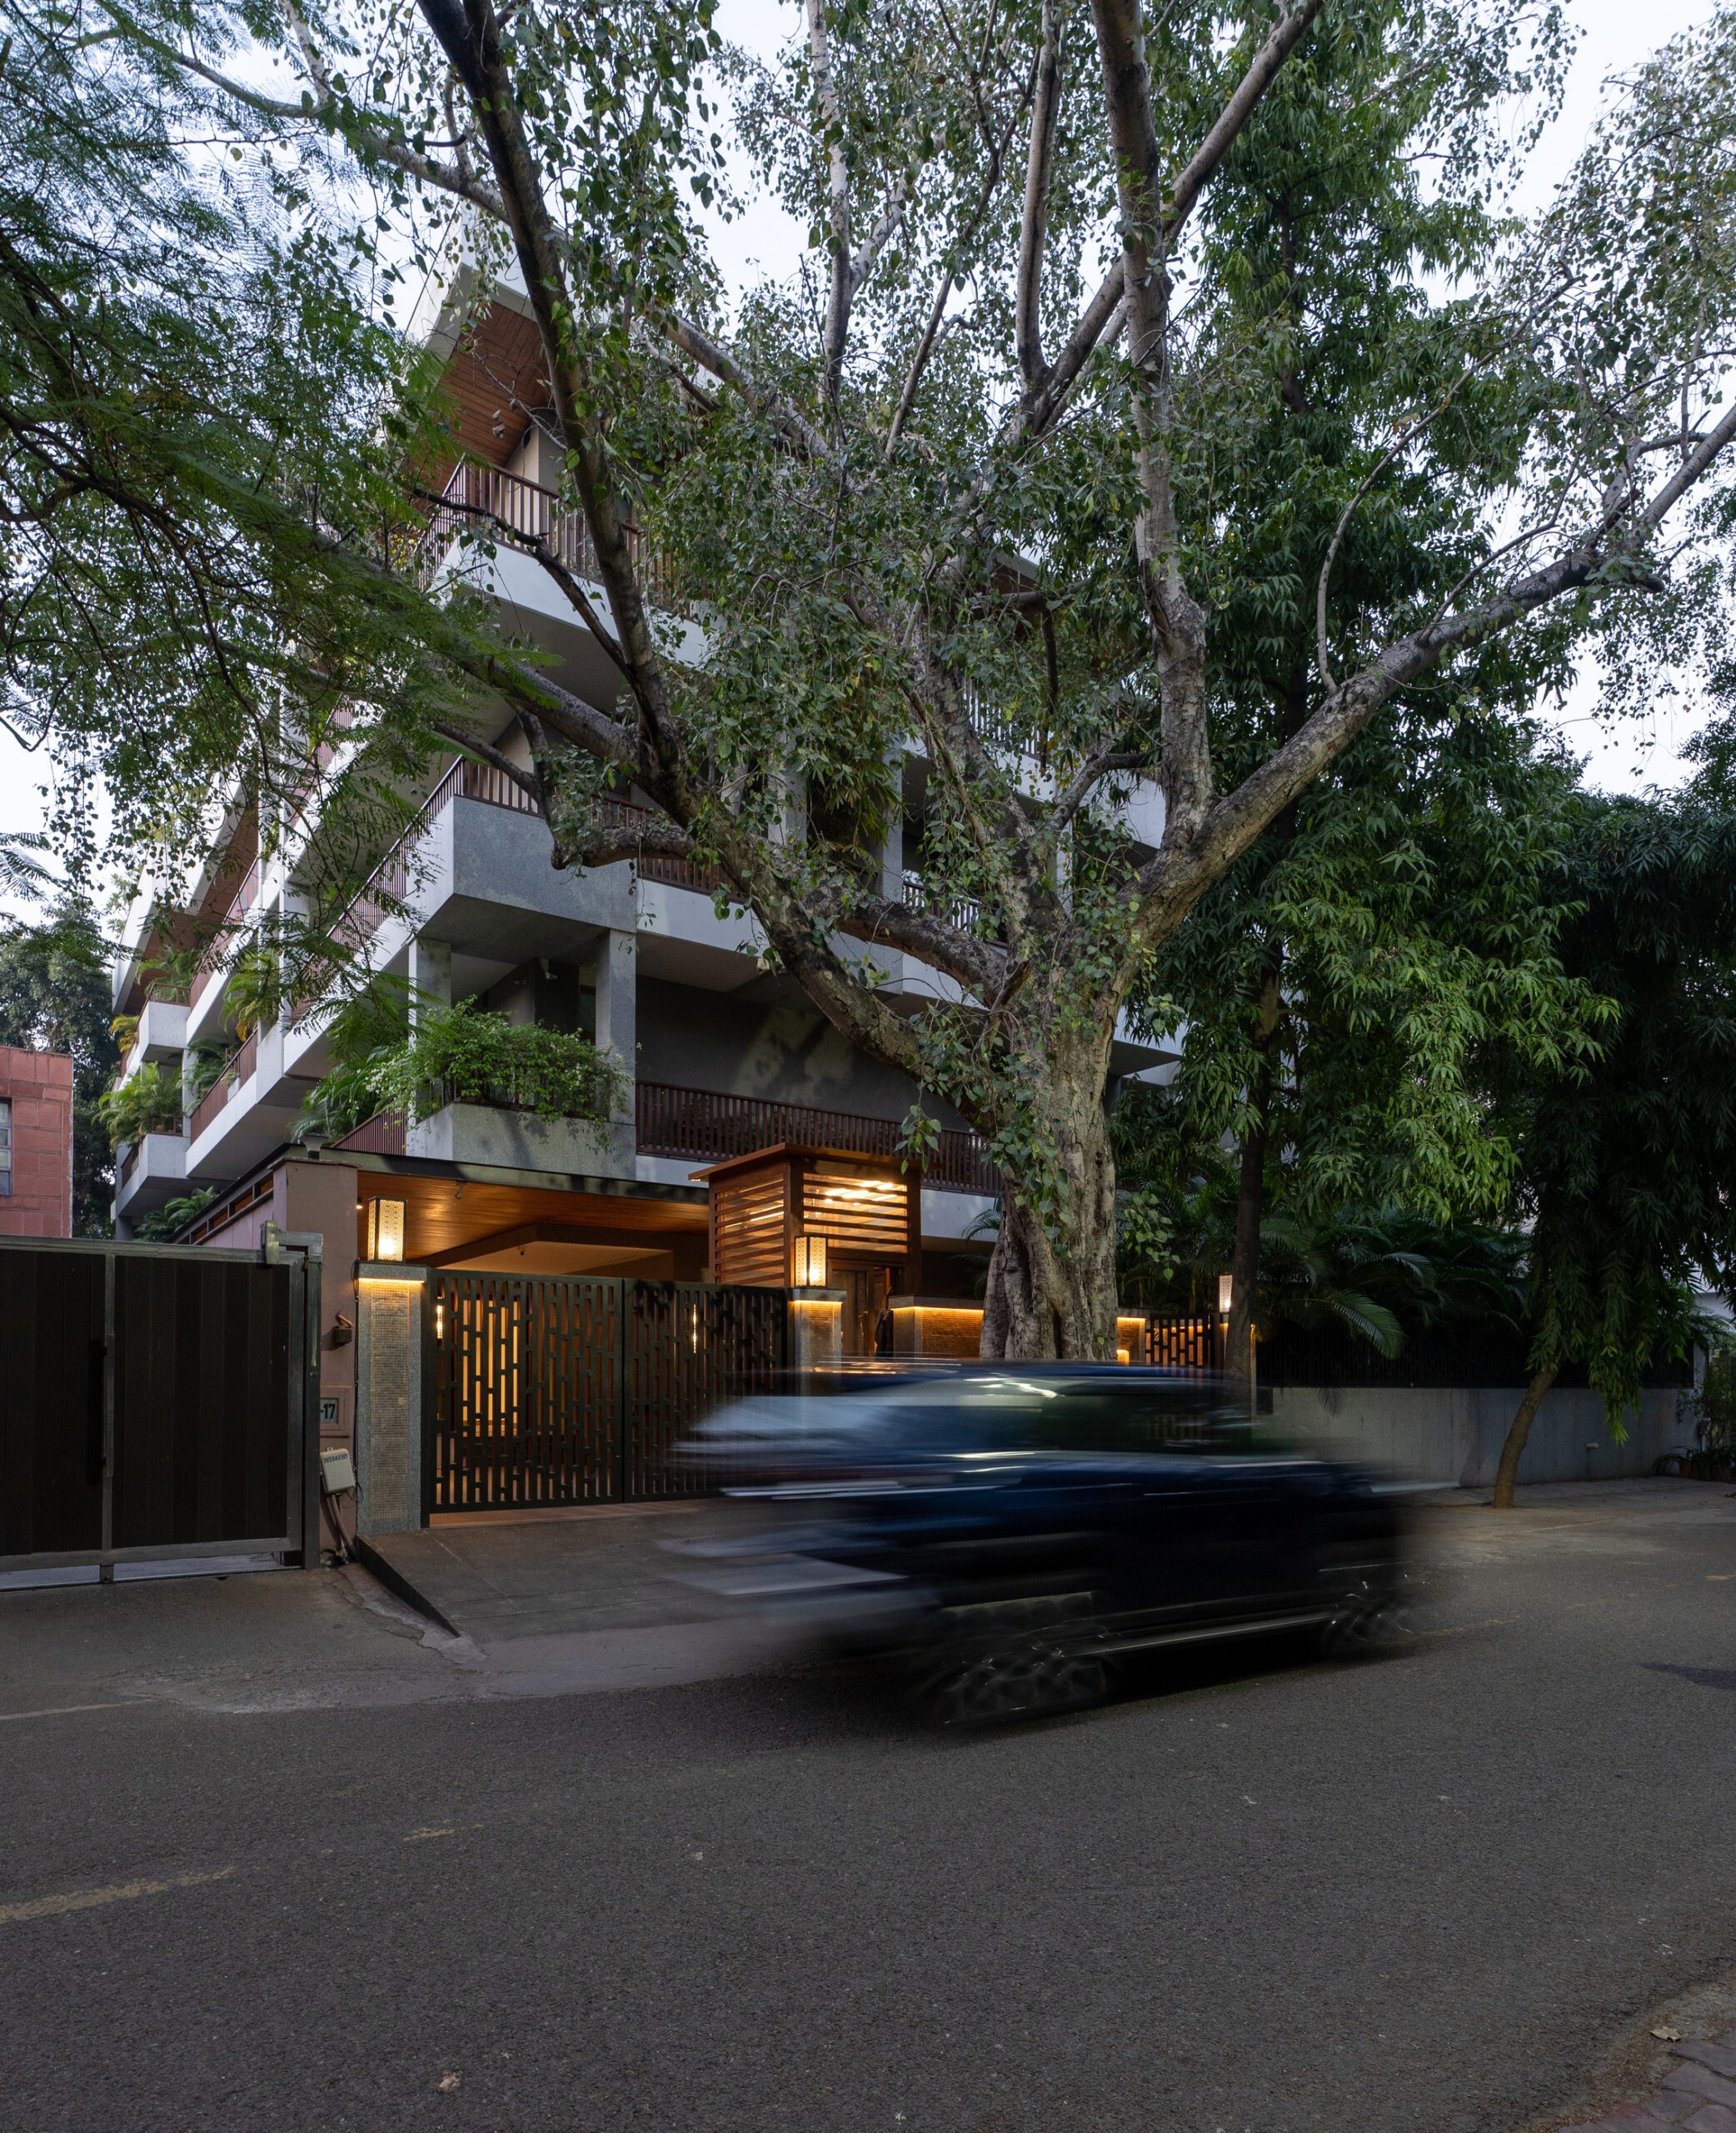 A18 Residence: Bringing Nature to Urban Living